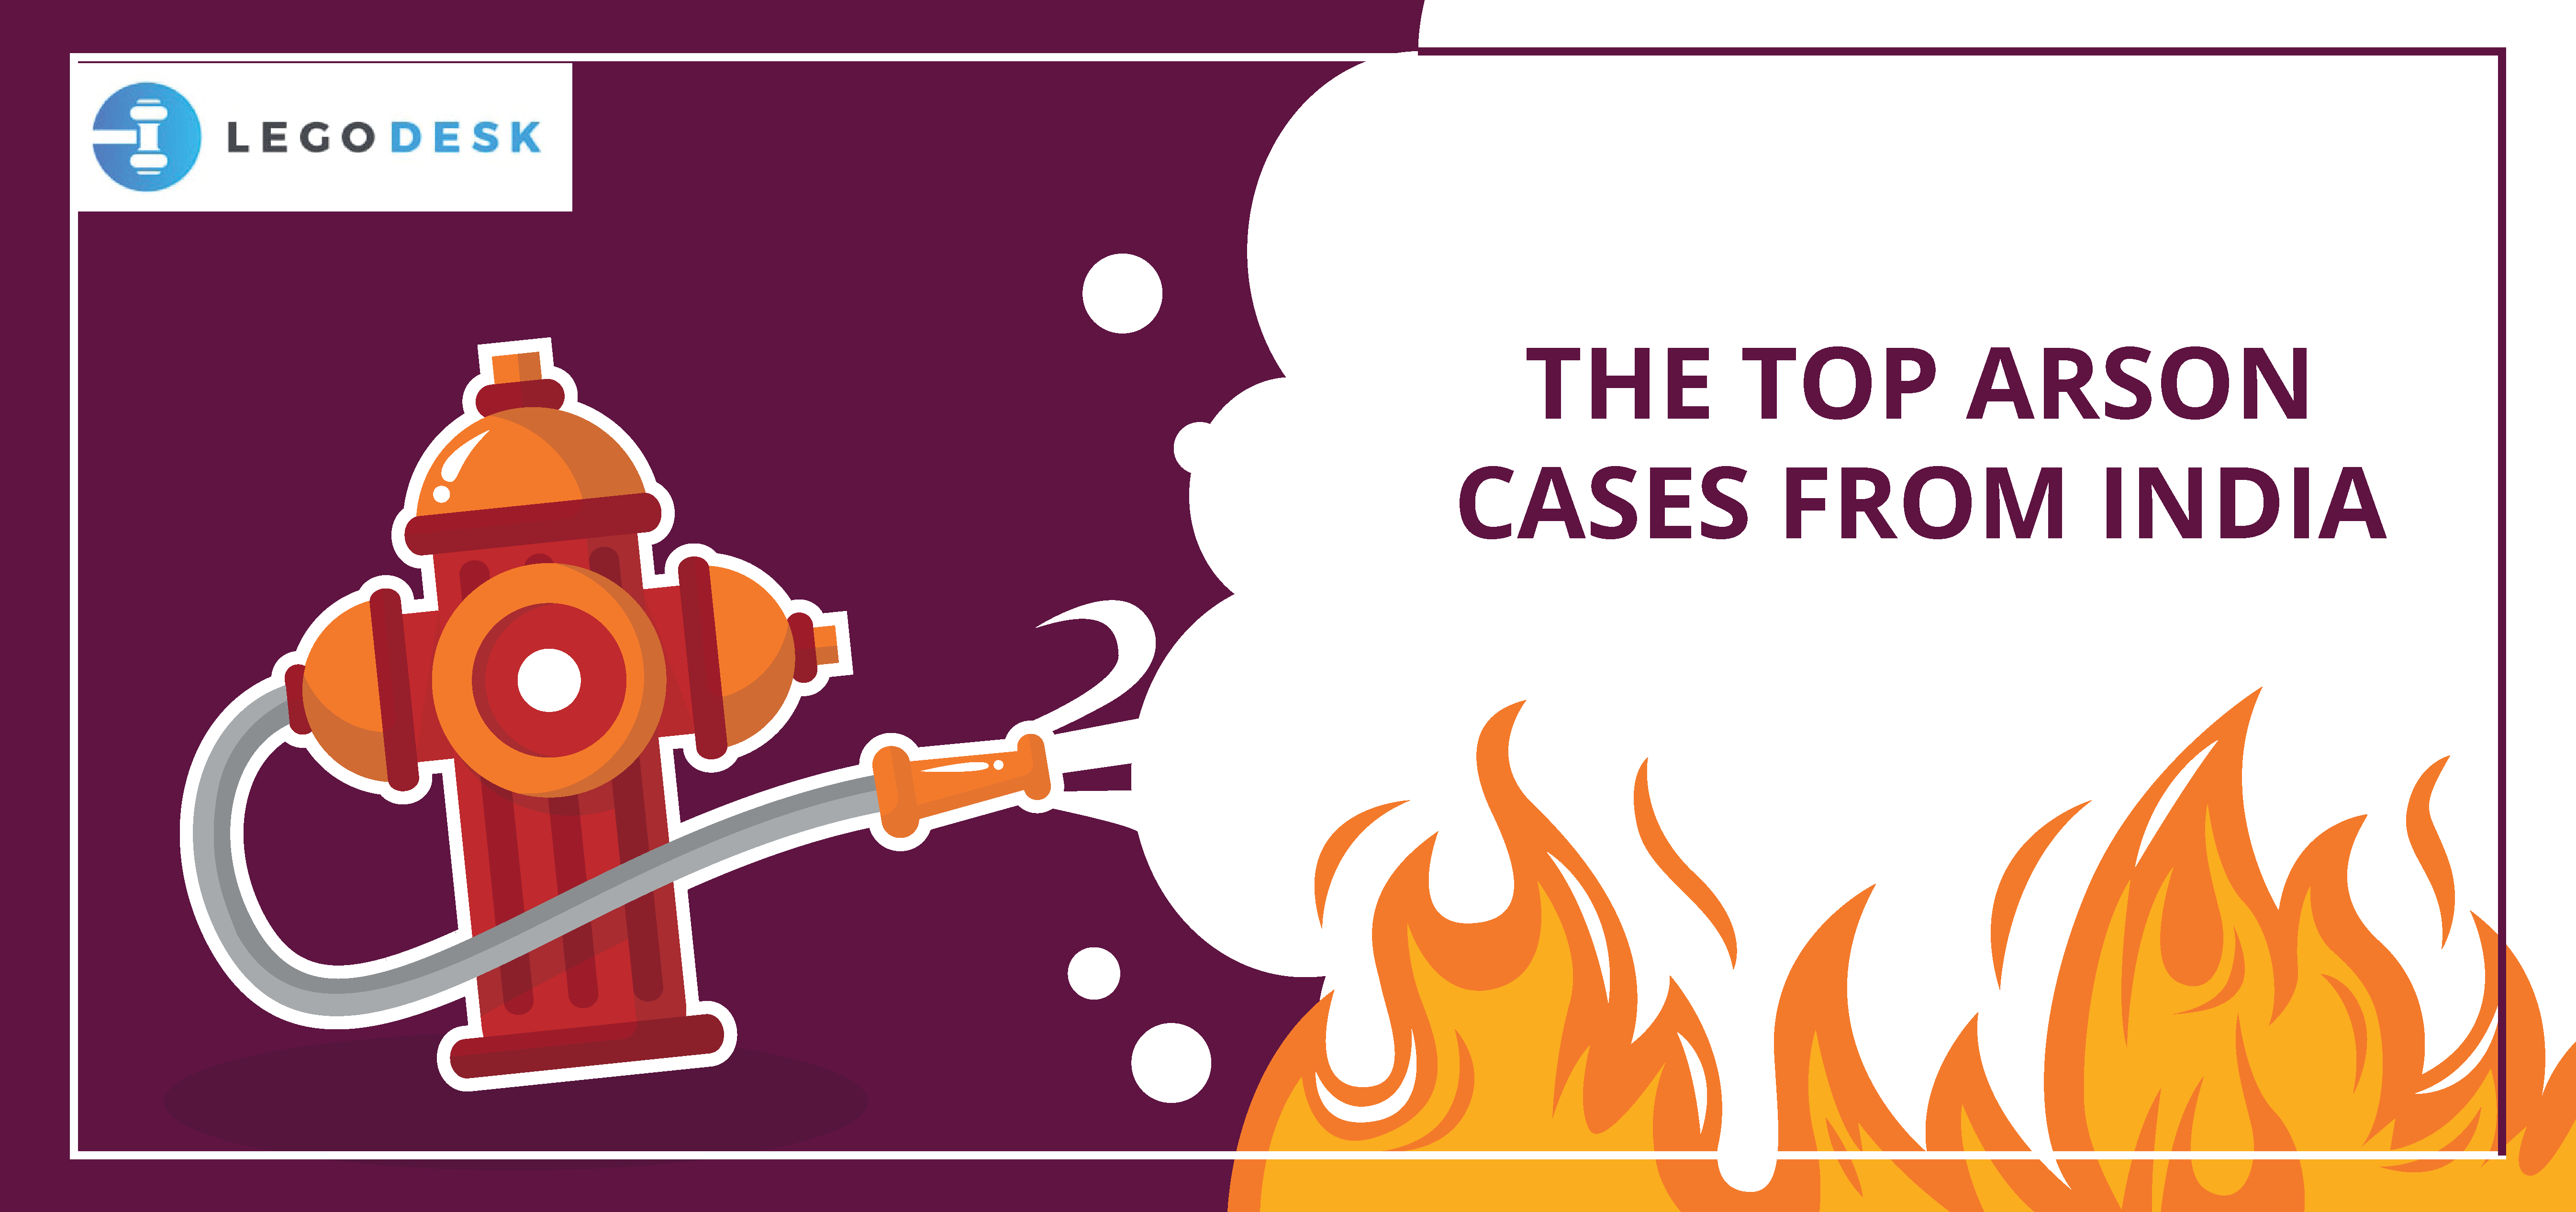 Top 4 Arson Cases From India – You Don’t Know